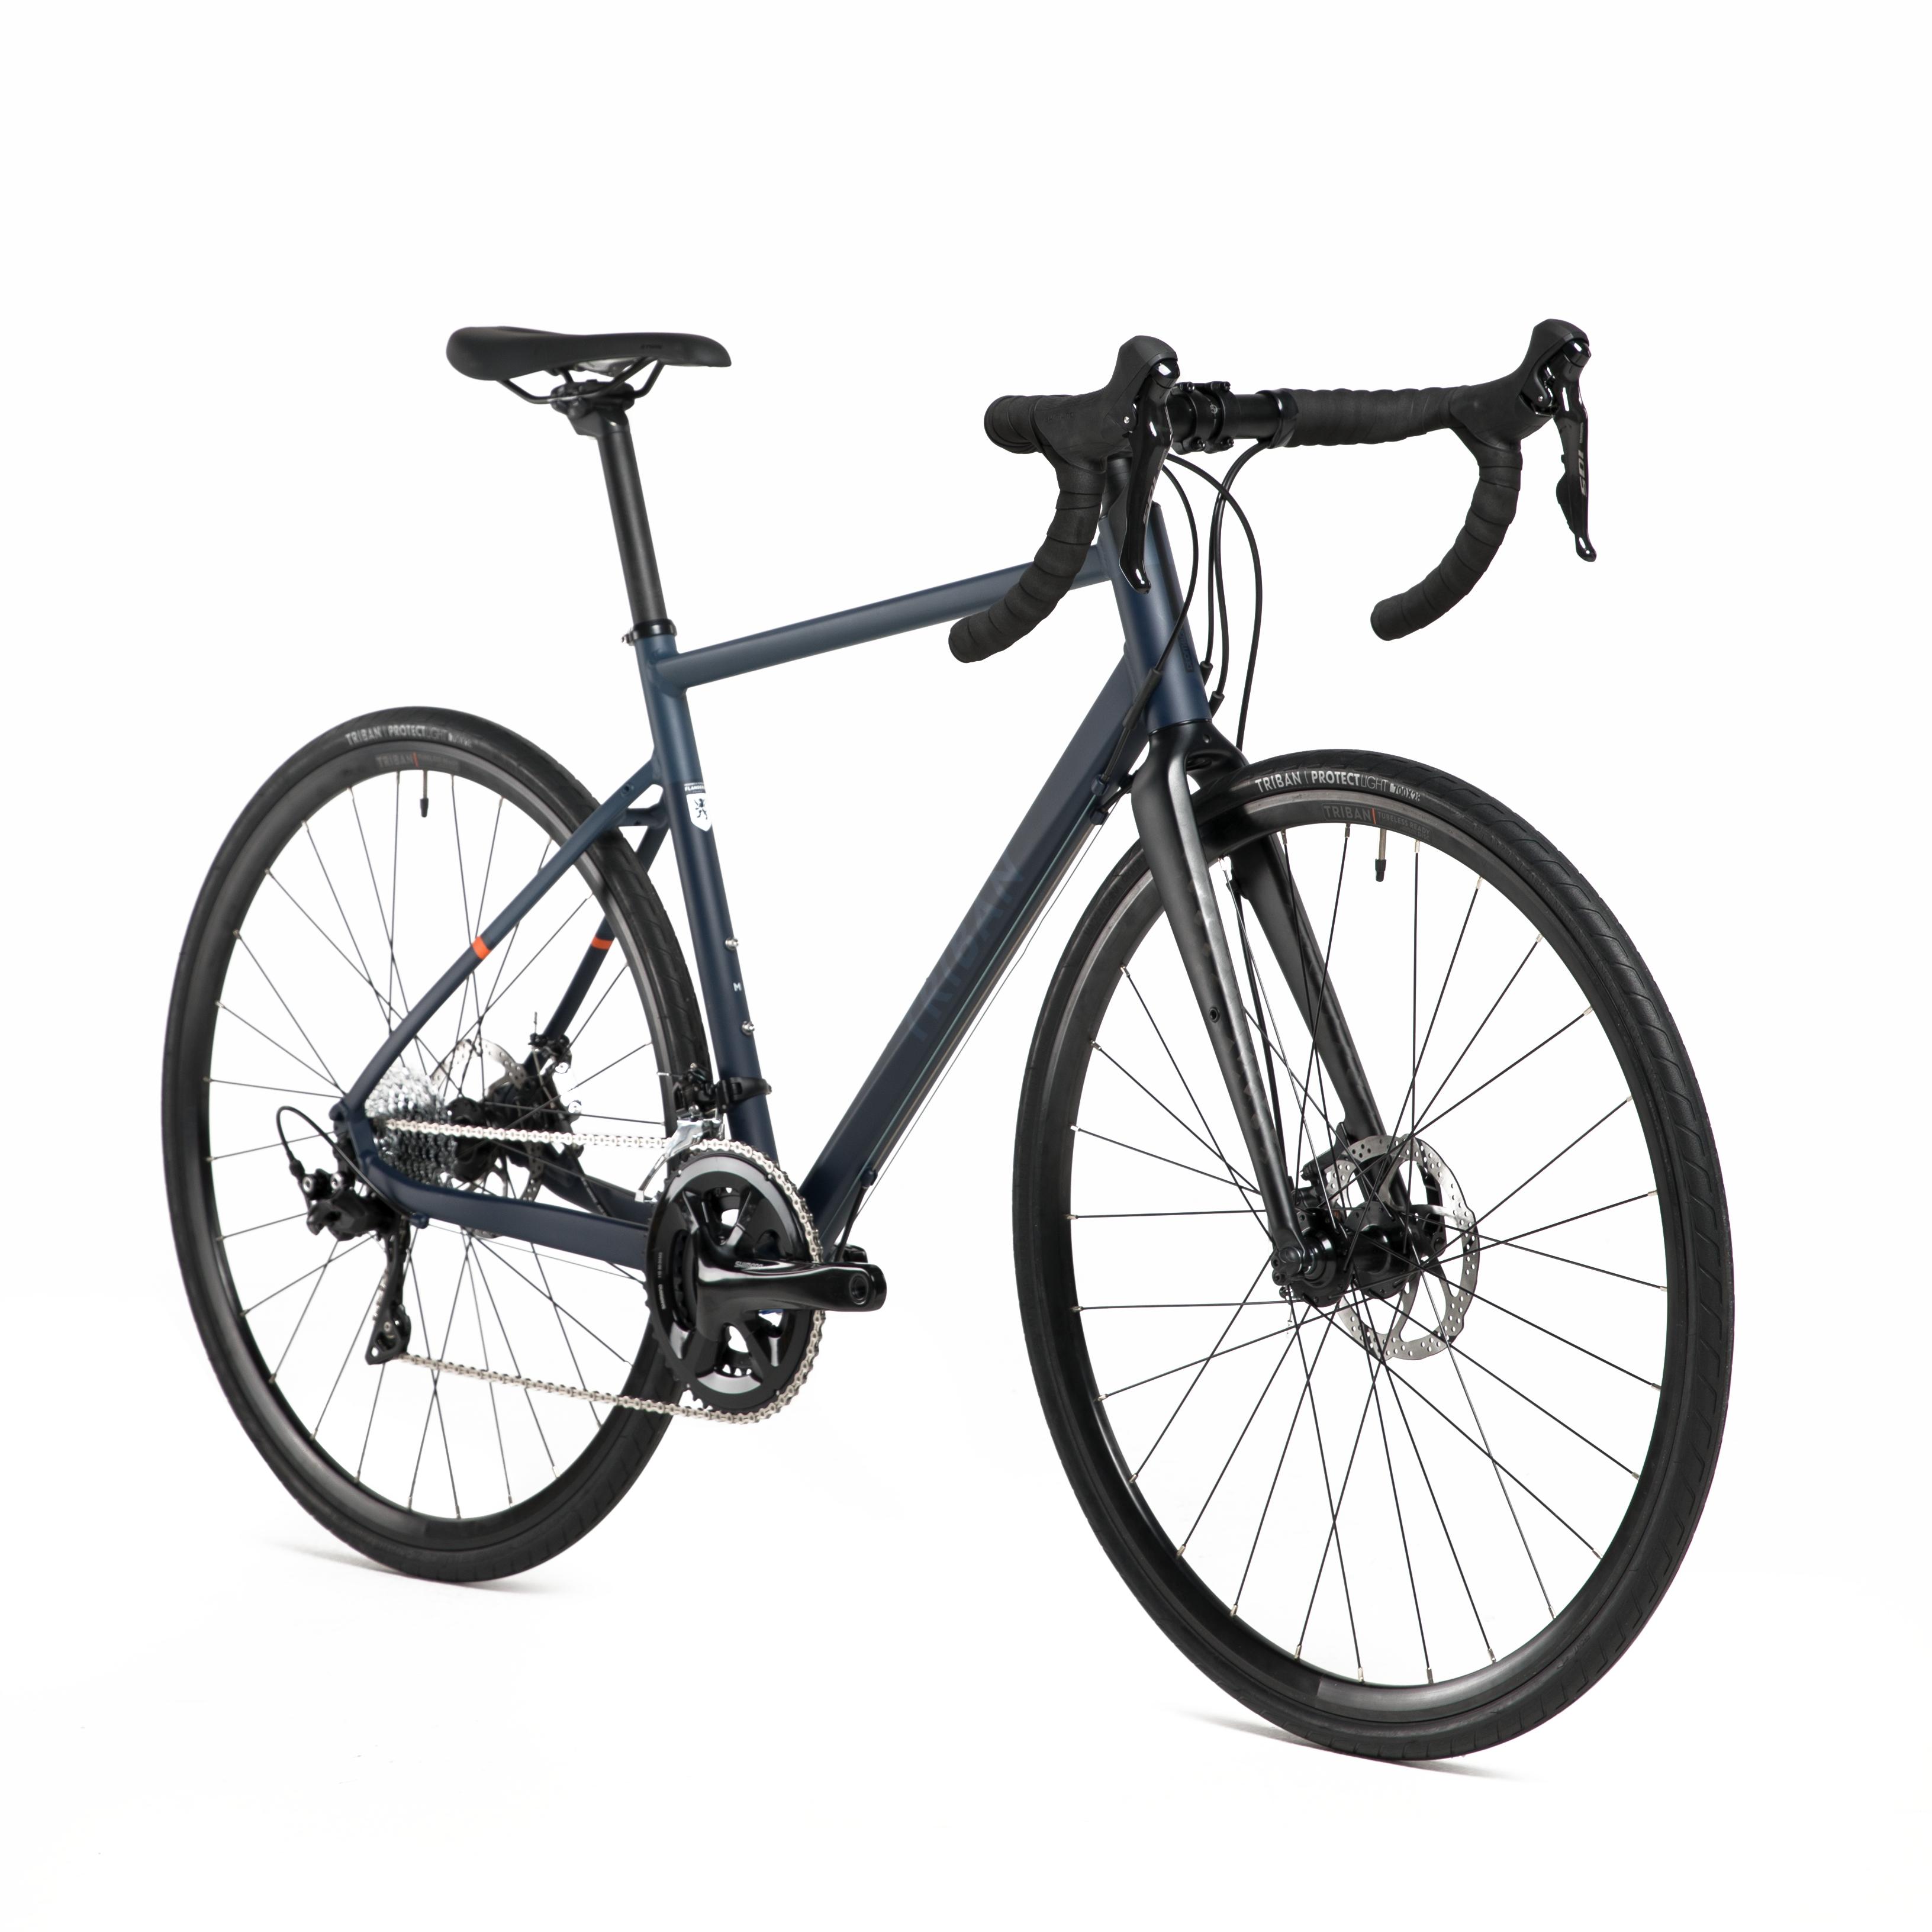 btwin triban rc520